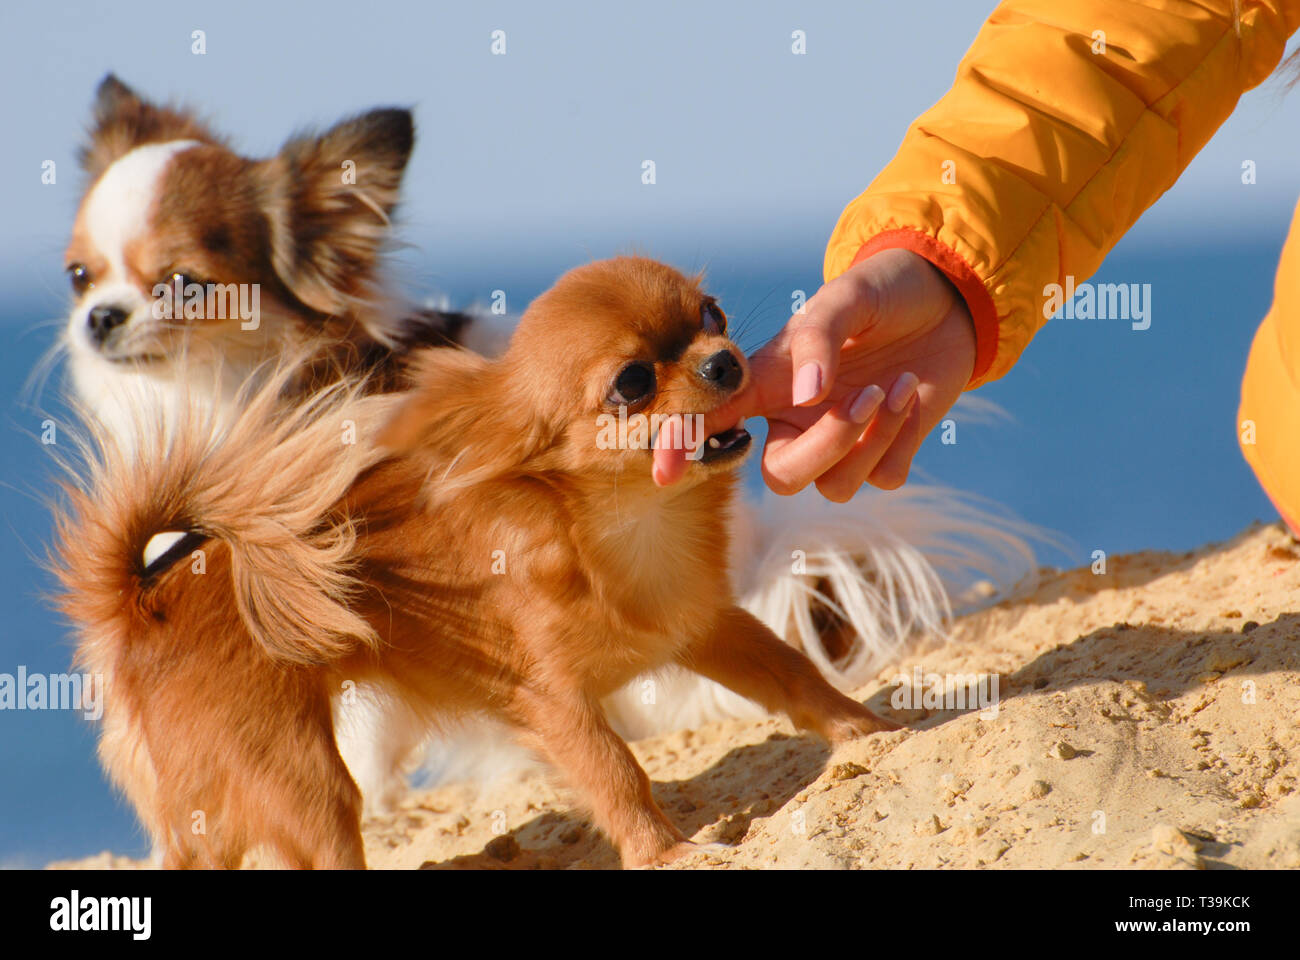 Funny Angry Little Dogs Chihuahua Biting Her Female Owner Girl Finger On Yellow Sand Stock Photo Alamy